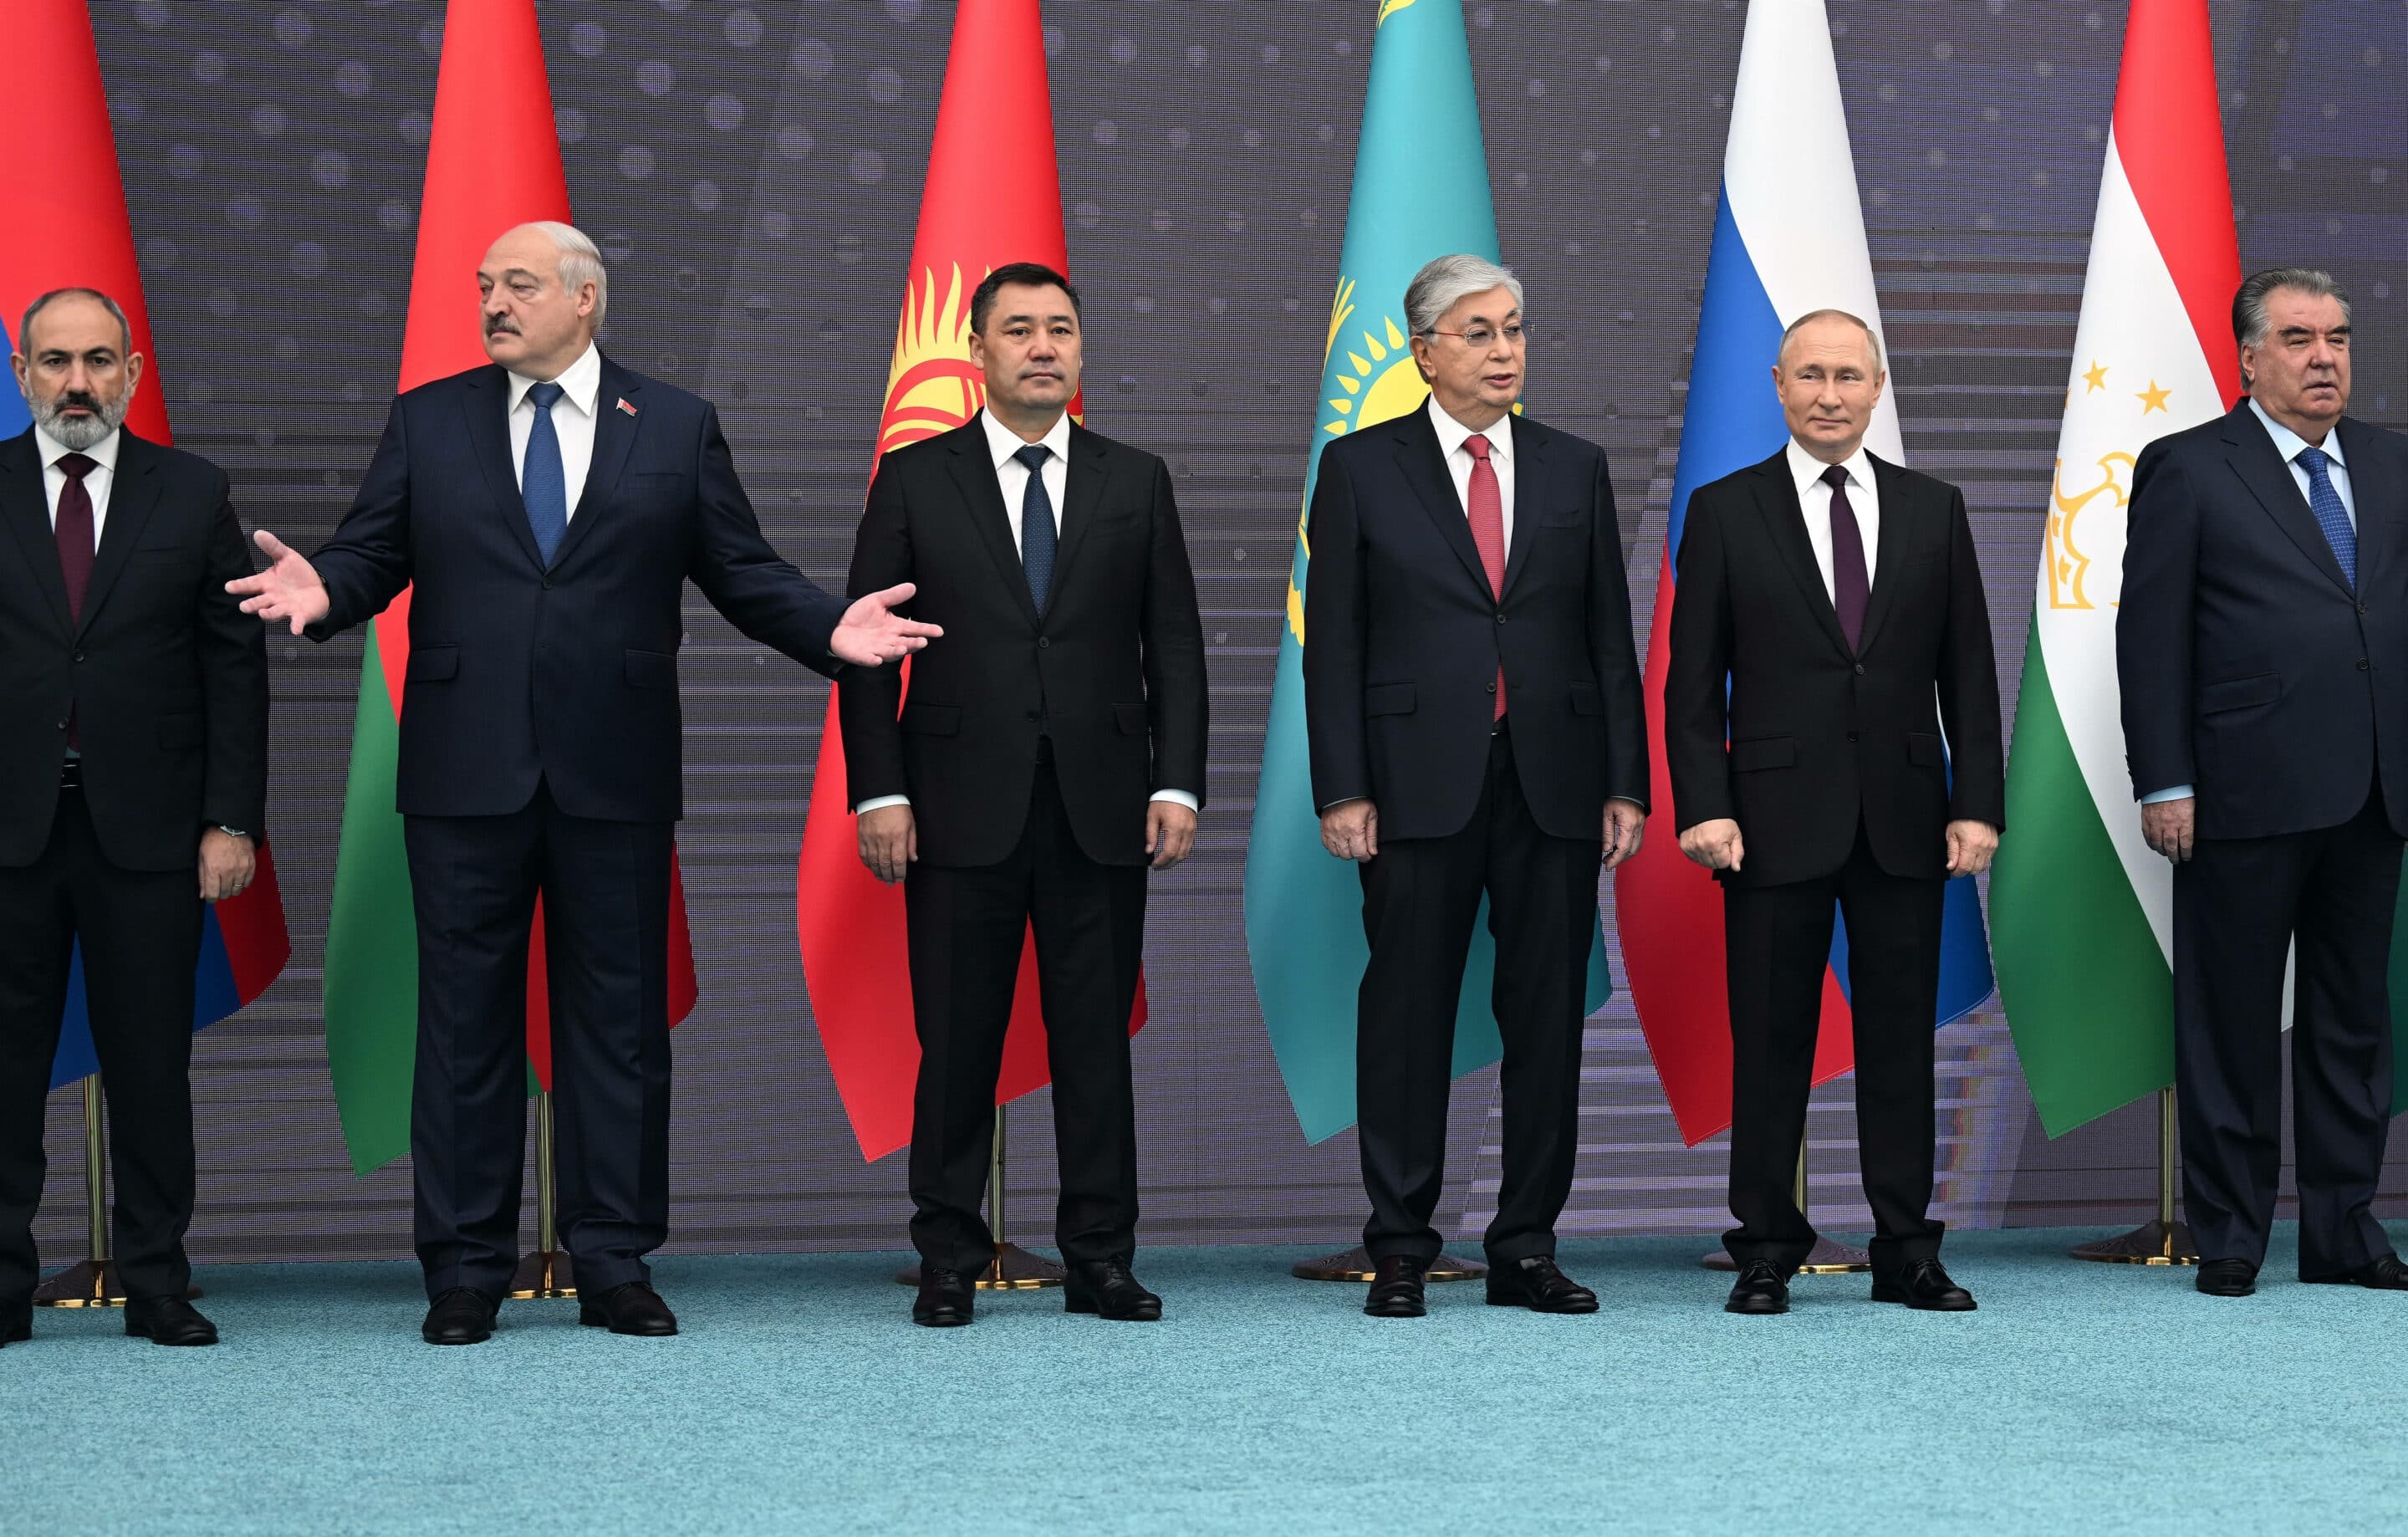 Working trip of Russian President Vladimir Putin to Astana. Meeting of the Council of Heads of State of the Commonwealth of Independent States (CIS) and the summit "Russia - Central Asia". From left to right: Armenian Prime Minister Nikol Pashinyan, Belarusian President Alexander Lukashenko, Kyrgyz President Sadyr Japarov, Kazakh President Kassym-Jomart Tokayev, Russian President Vladimir Putin and Tajik President Emomali Rahmon during a joint photographing ceremony for the CIS heads of state.
14.10.2022 Kazakhstan, Astana
Photo credit: Dmitry Azarov/Kommersant/Sipa USA/42094397//2210150001